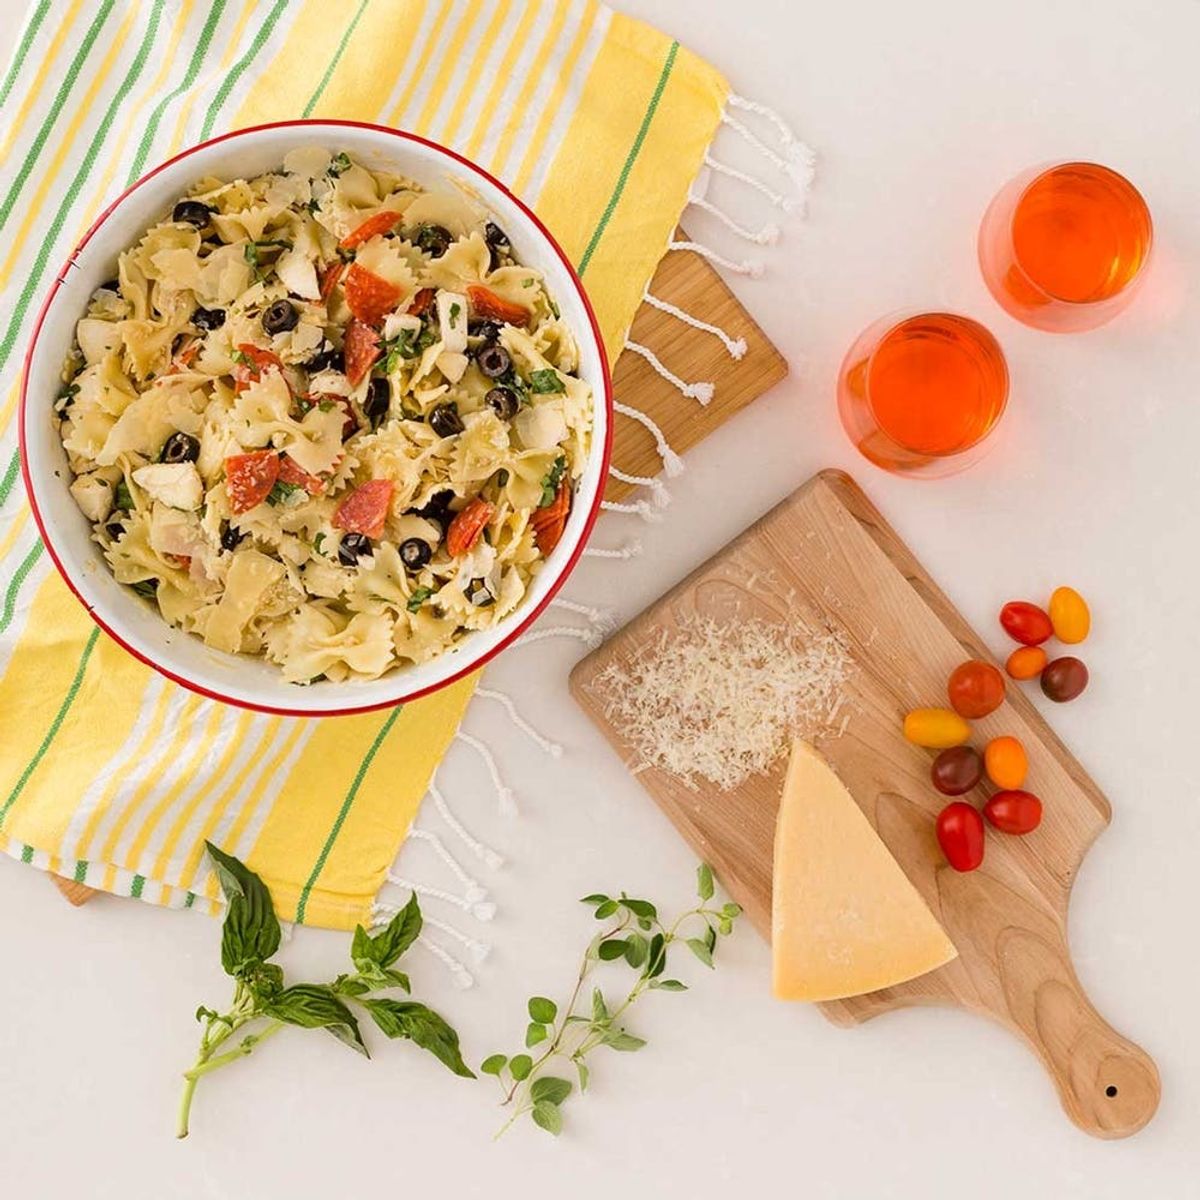 Make This Pizza Pasta Salad for Your Next Summer Picnic